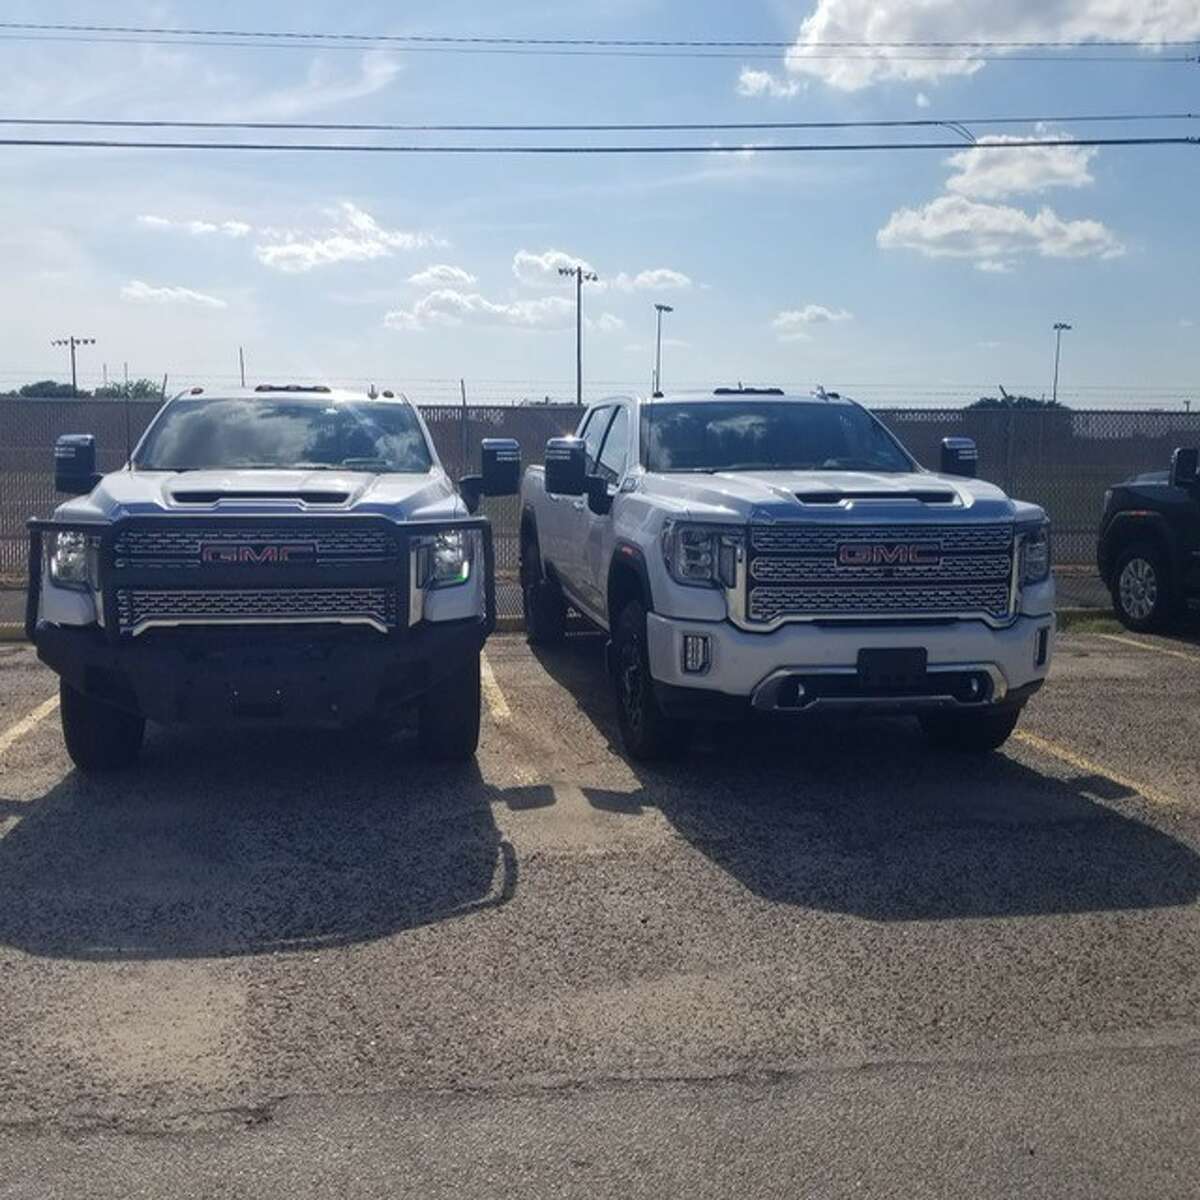 The above stolen cars — two GMC Denali's and a Chevy Z71 — were recovered by the Laredo Police Department Auto Theft Task Force after being purchased by Laredoans on the Faceboook Marketplace. 